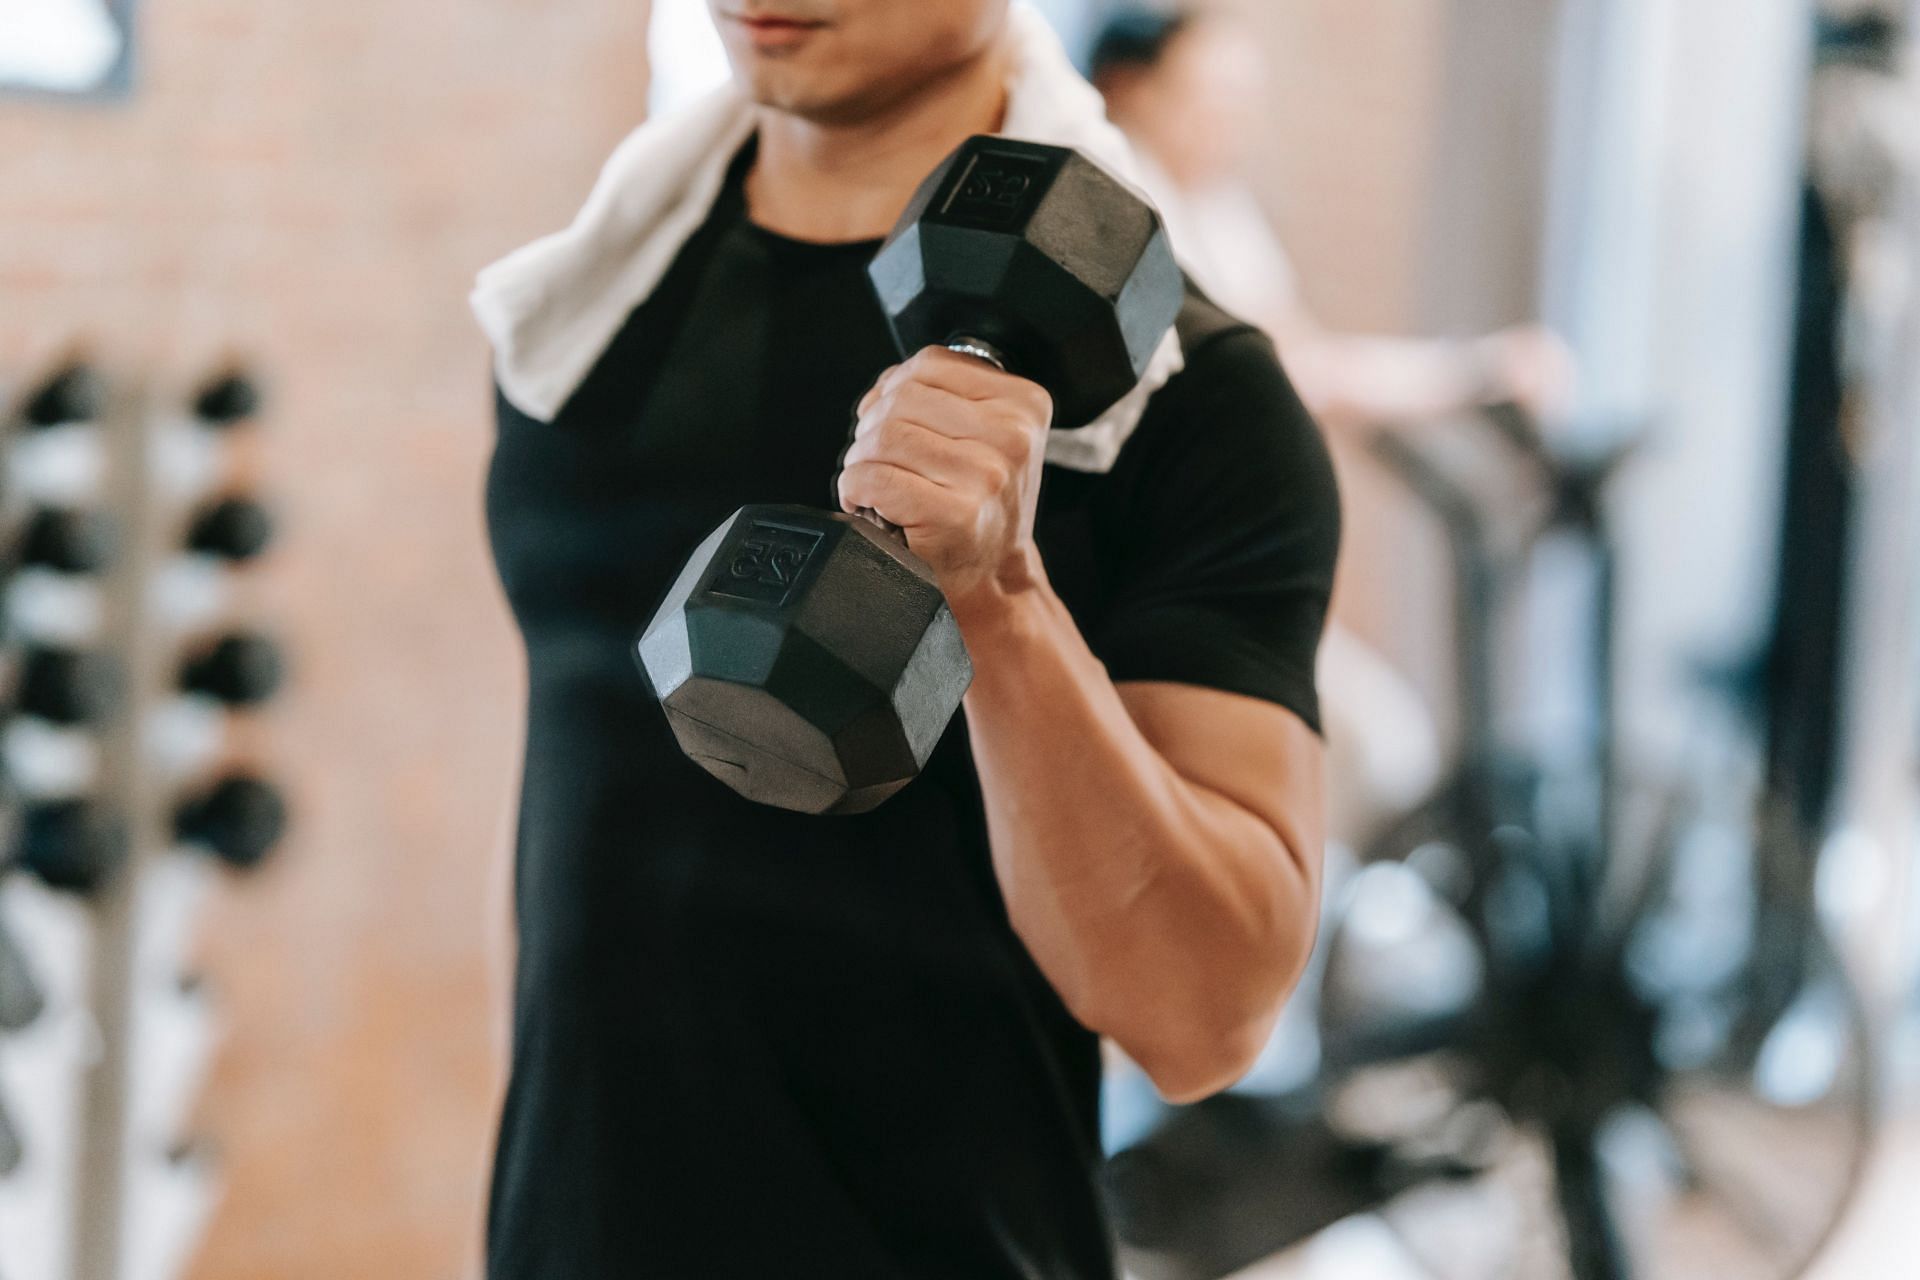 Egyptian raise can be performed with the dumbbells. (Image via Pexels/ Andres Ayrton)